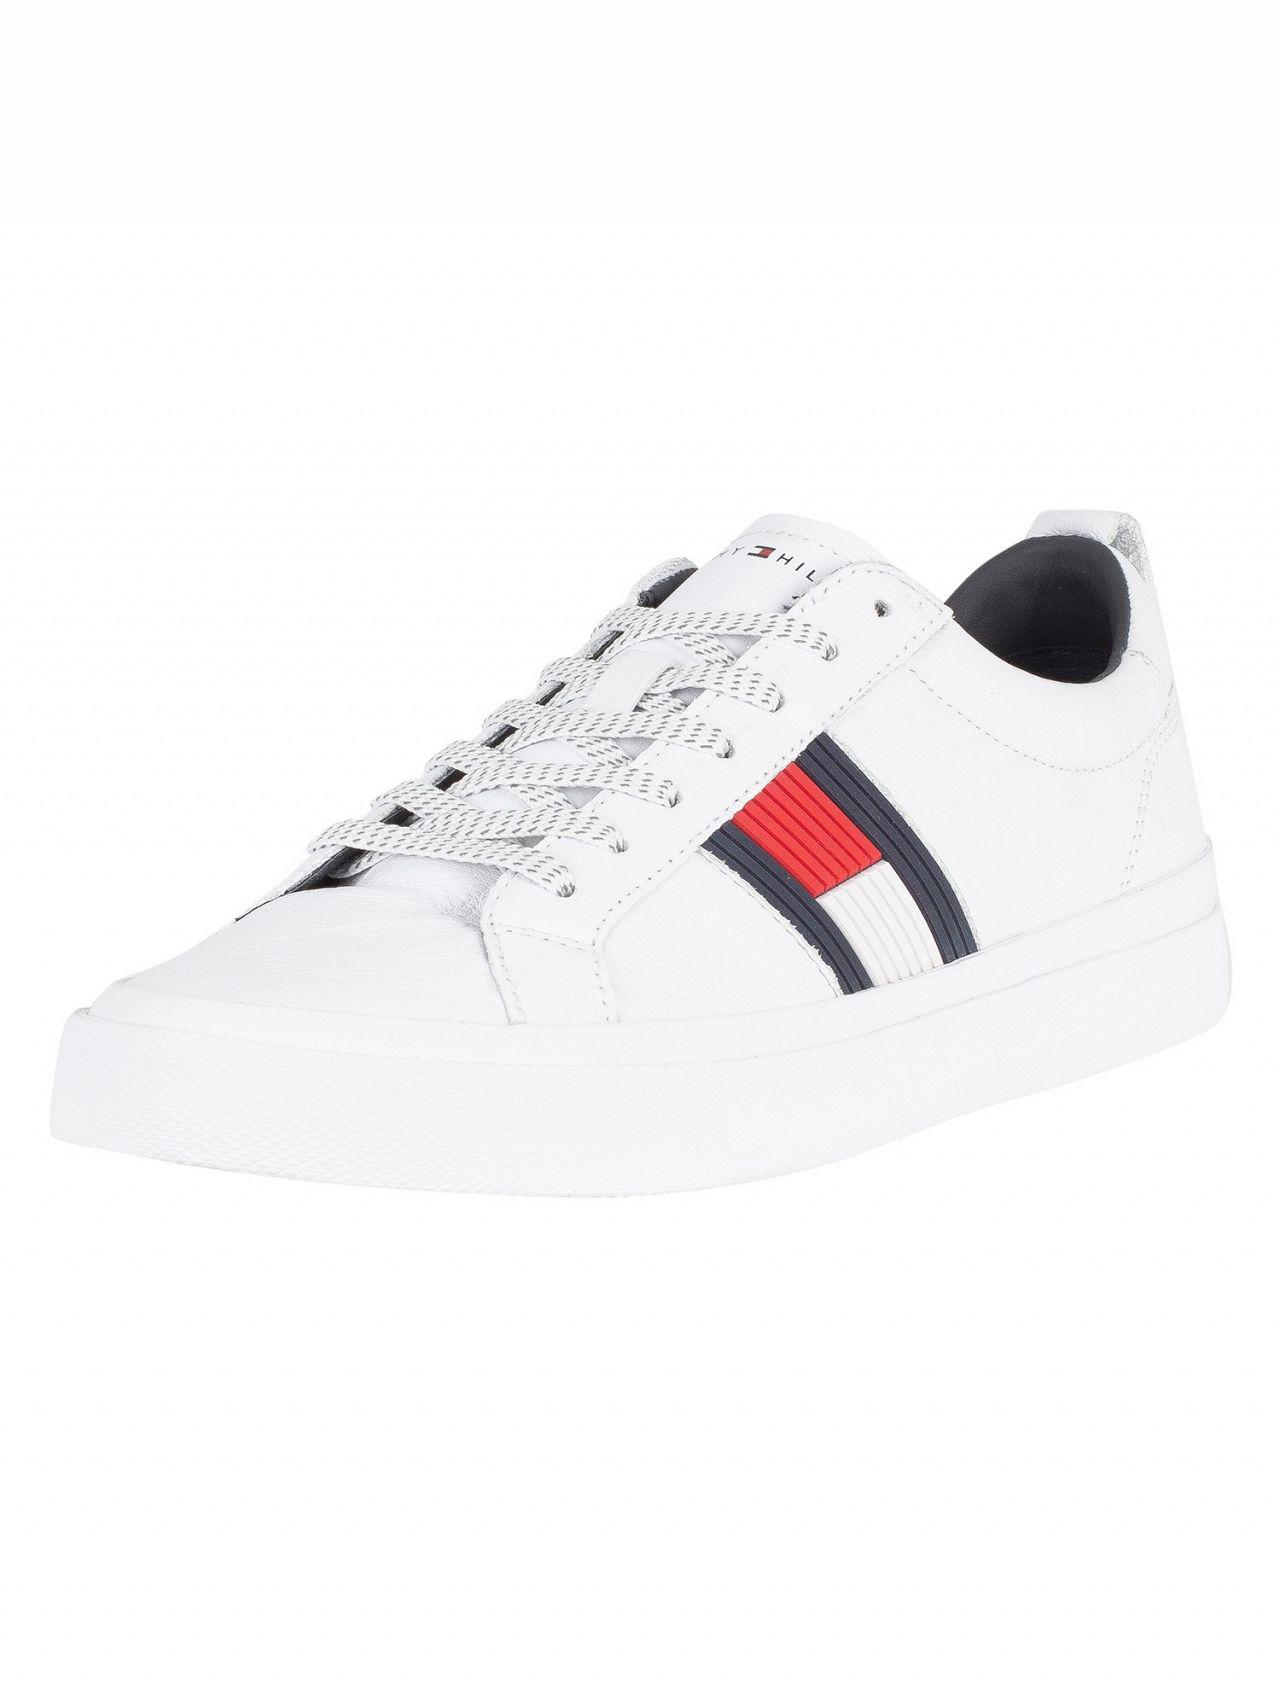 Tommy Hilfiger Flag Detail Low-top Leather Sneaker in White for Men - Lyst